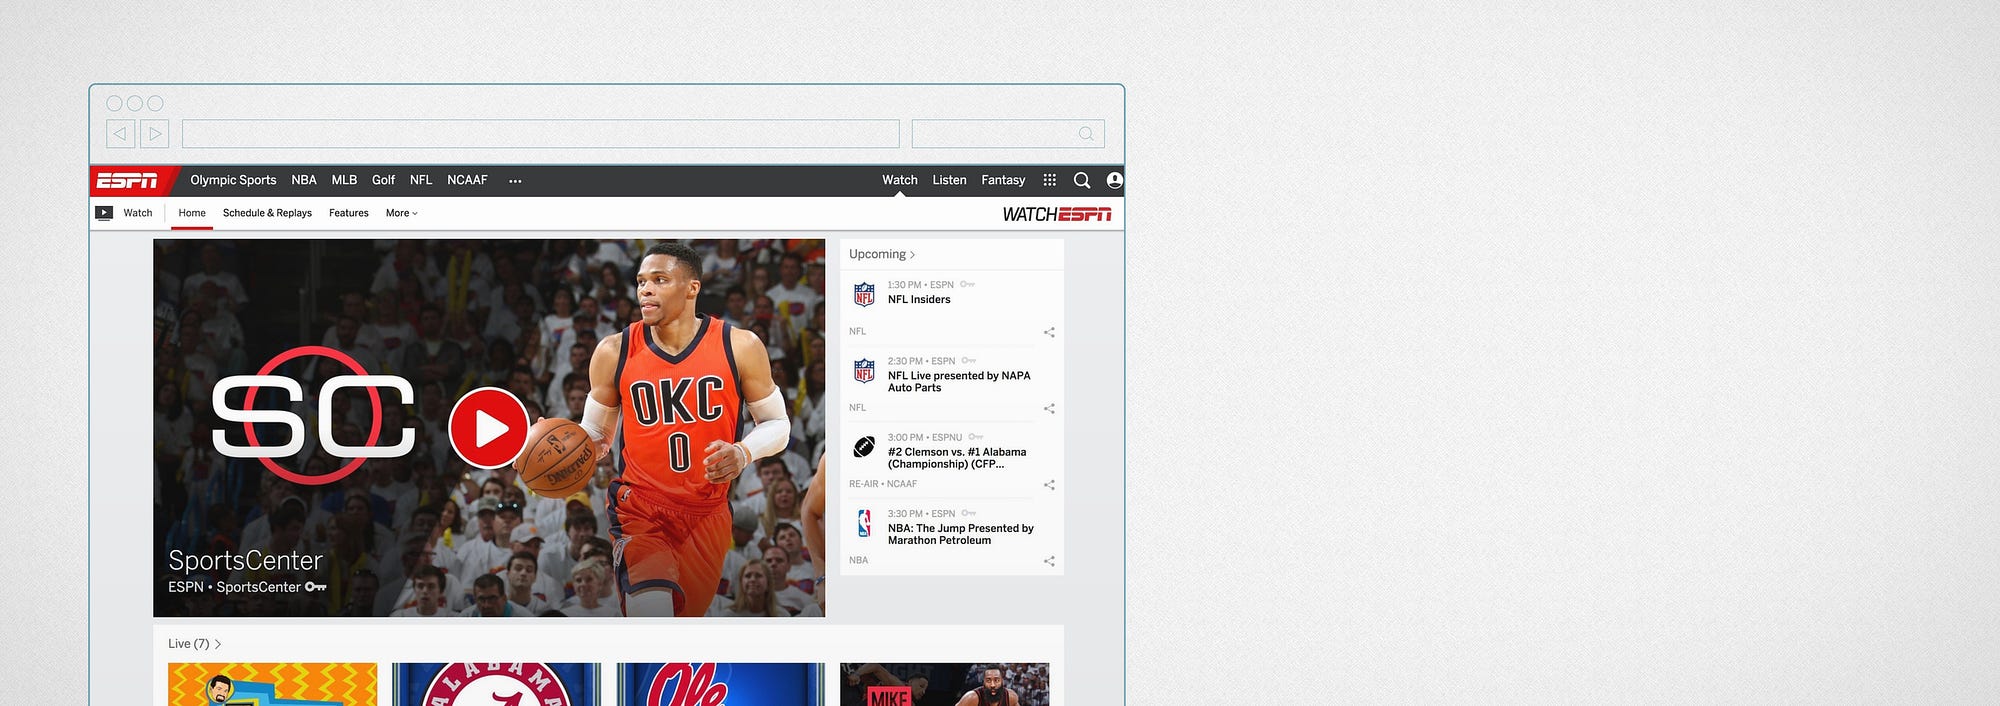 New to ESPN Digital Over the last couple weeks, several new features and updates have rolled out… by Ryan Spoon Medium